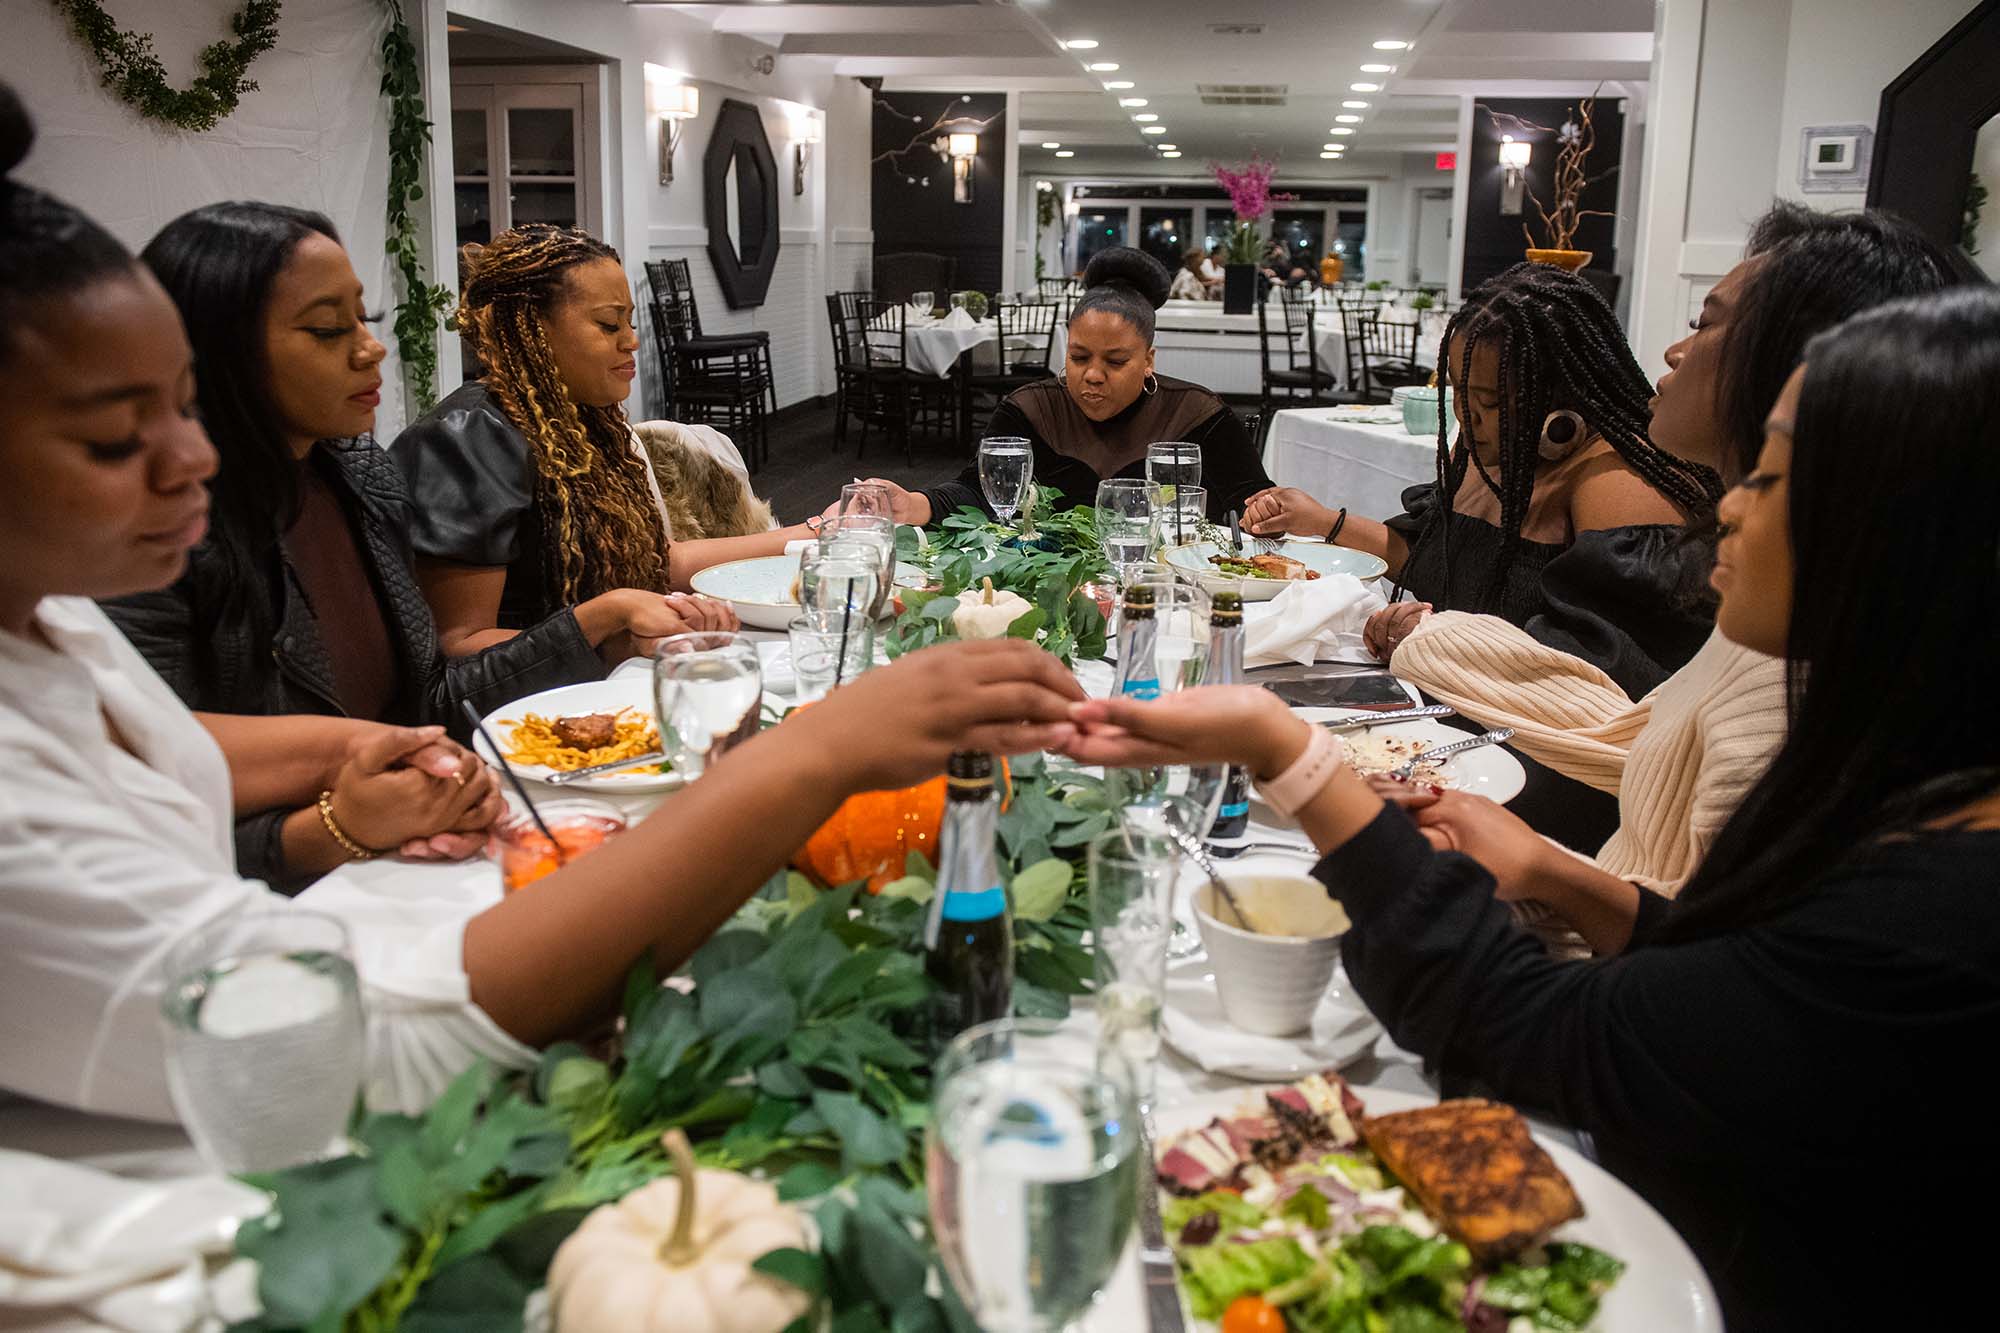 Photo of 7 Black women seated and holding hands around a rectangular dining table with an assortment of food on it